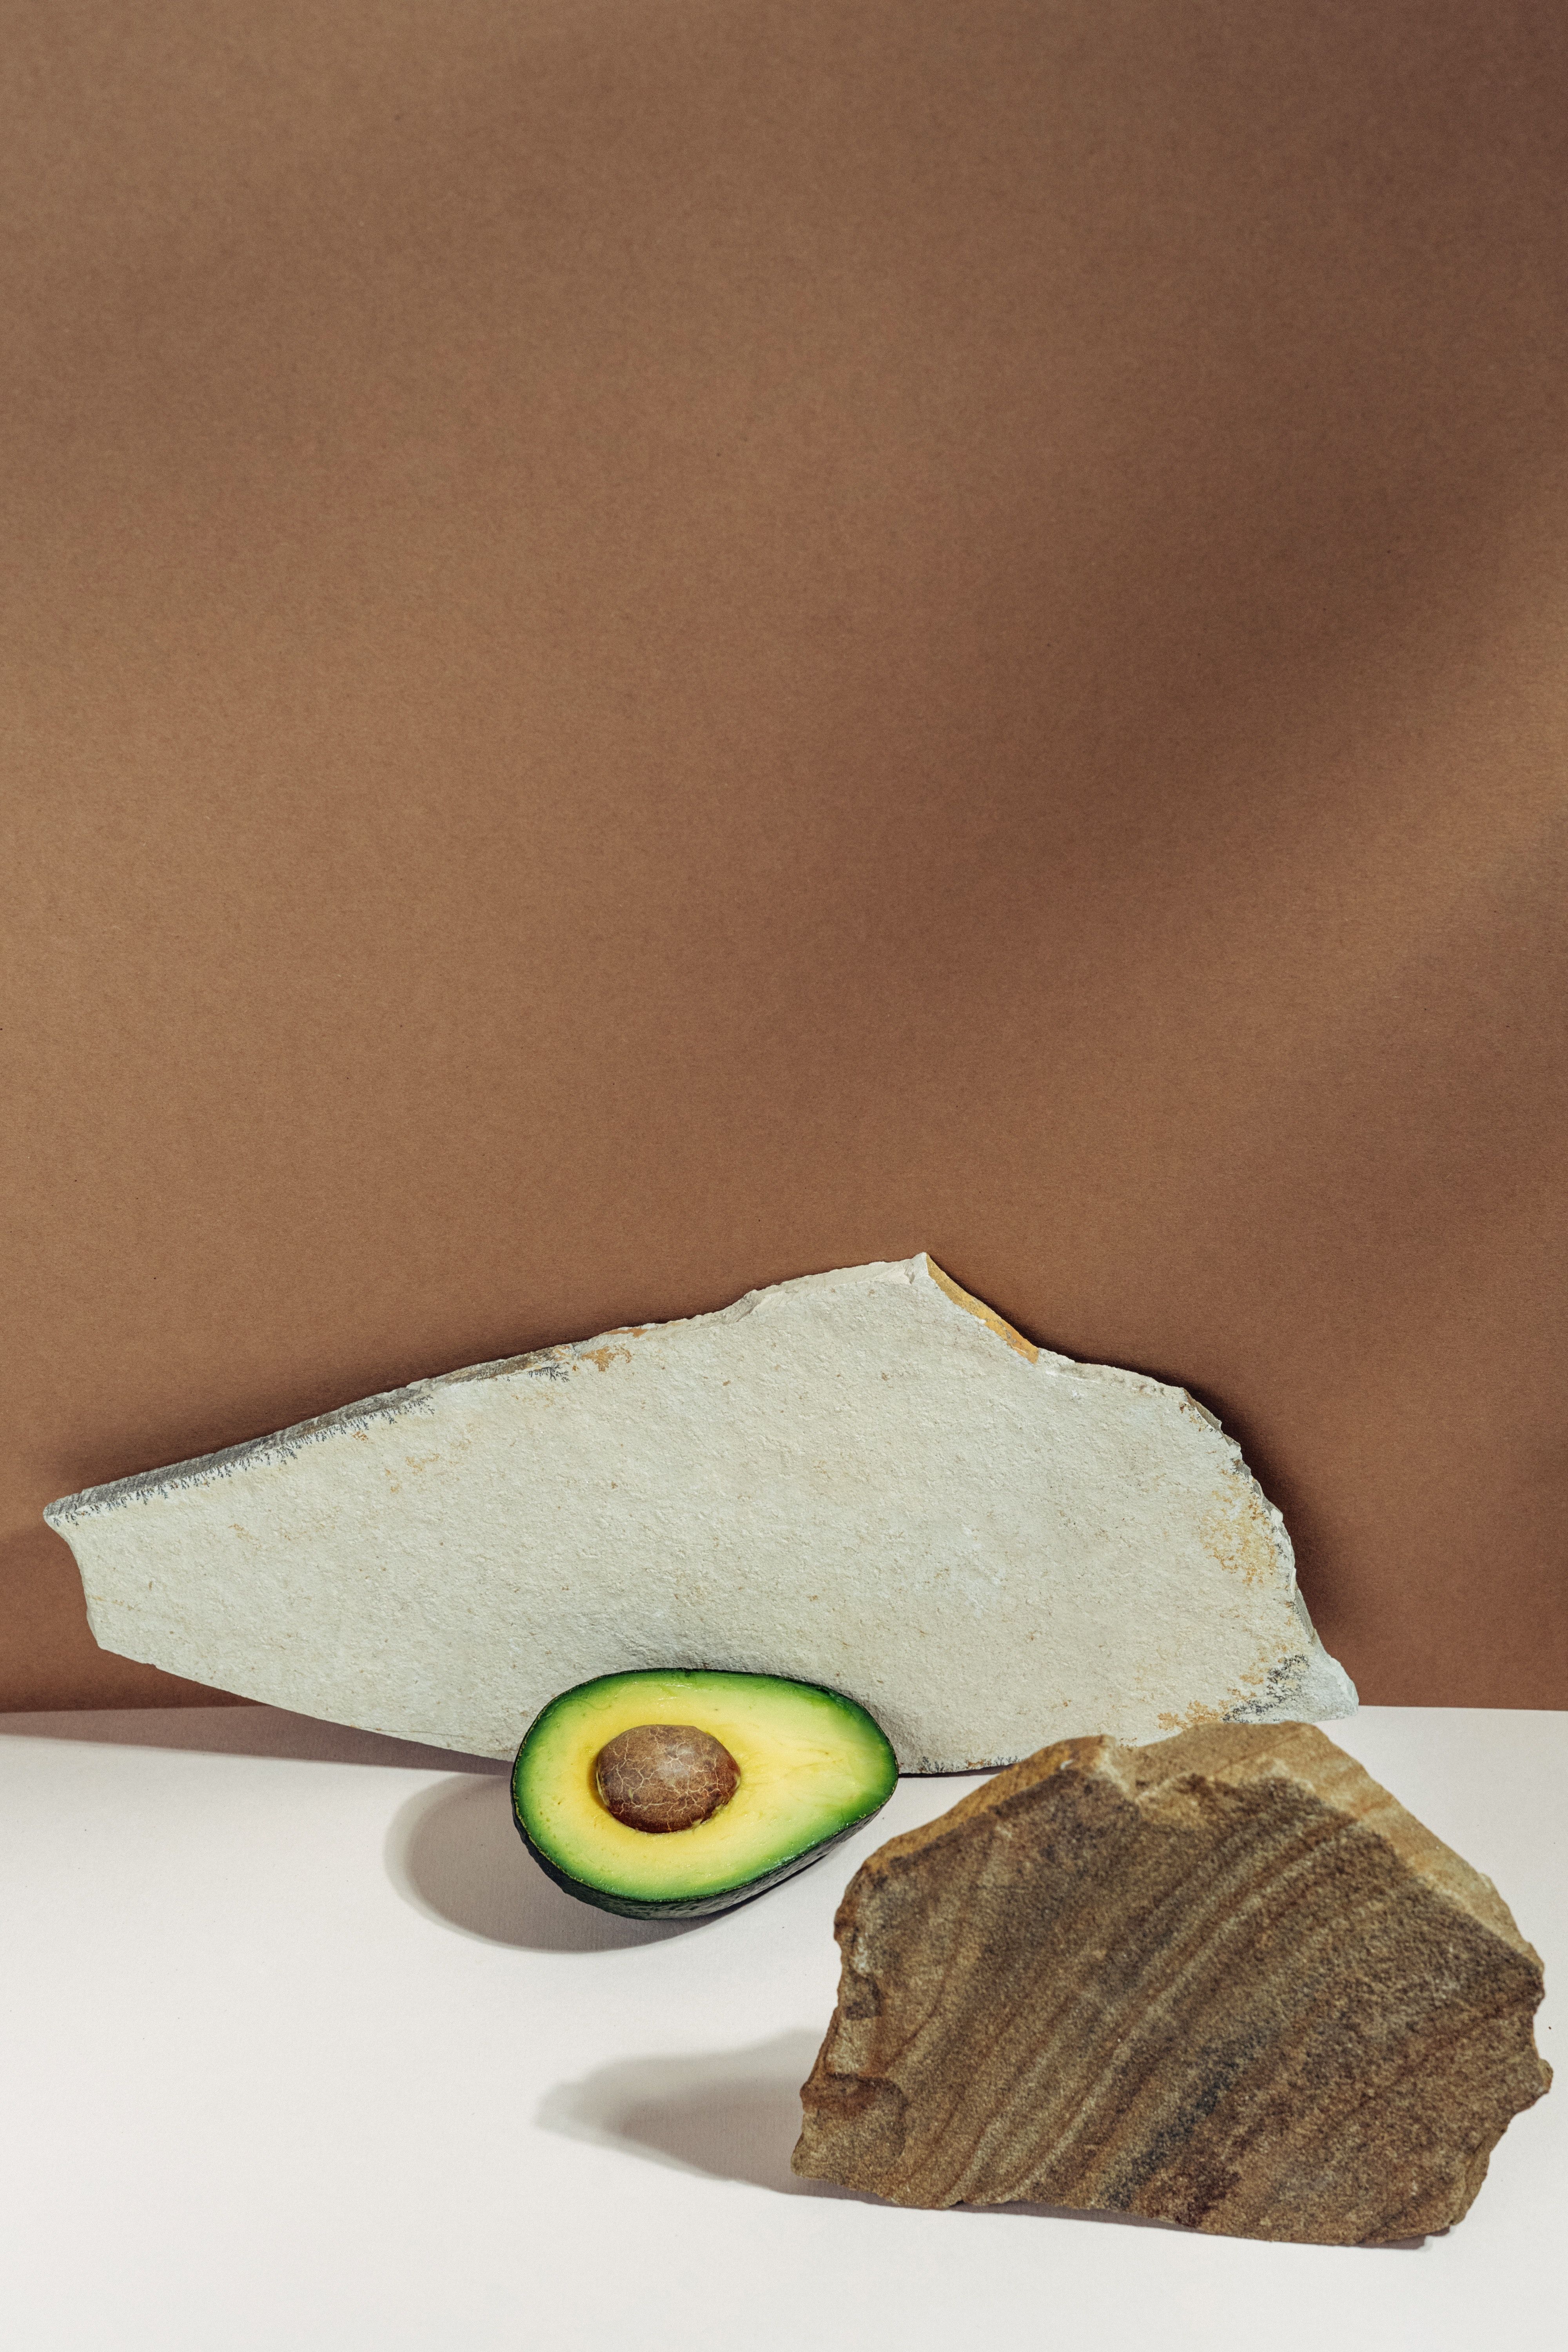 A sliced avocado on a white surface with a brown background. - Avocado